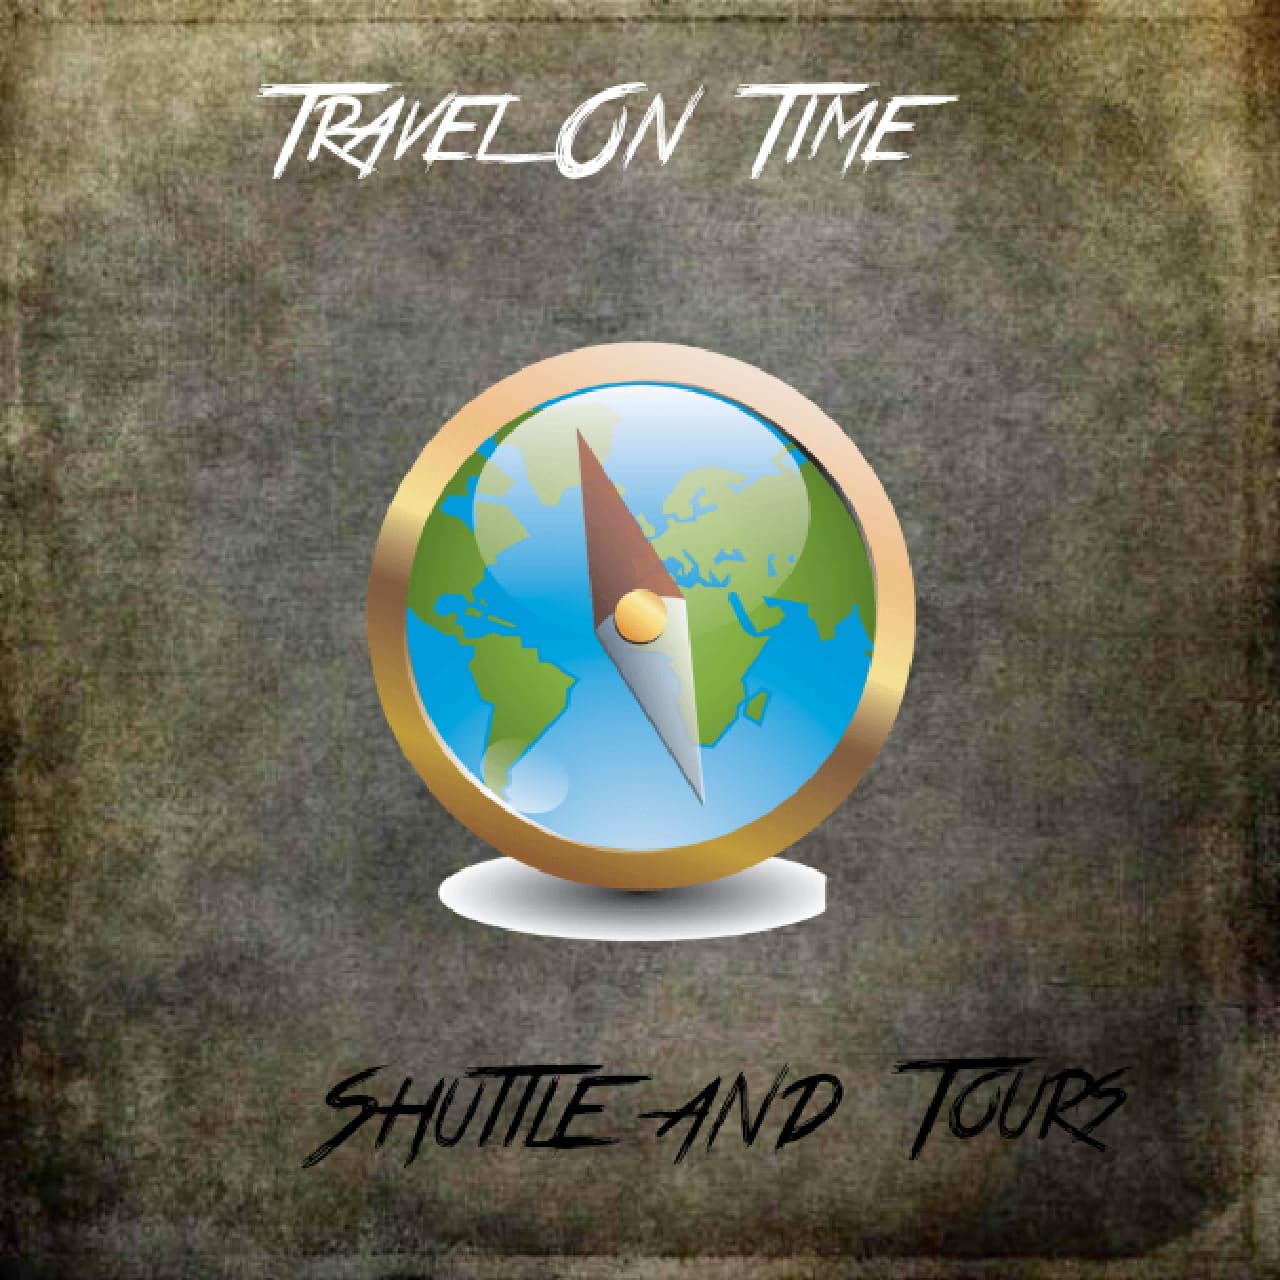 Travel On Time Shuttle and Tours